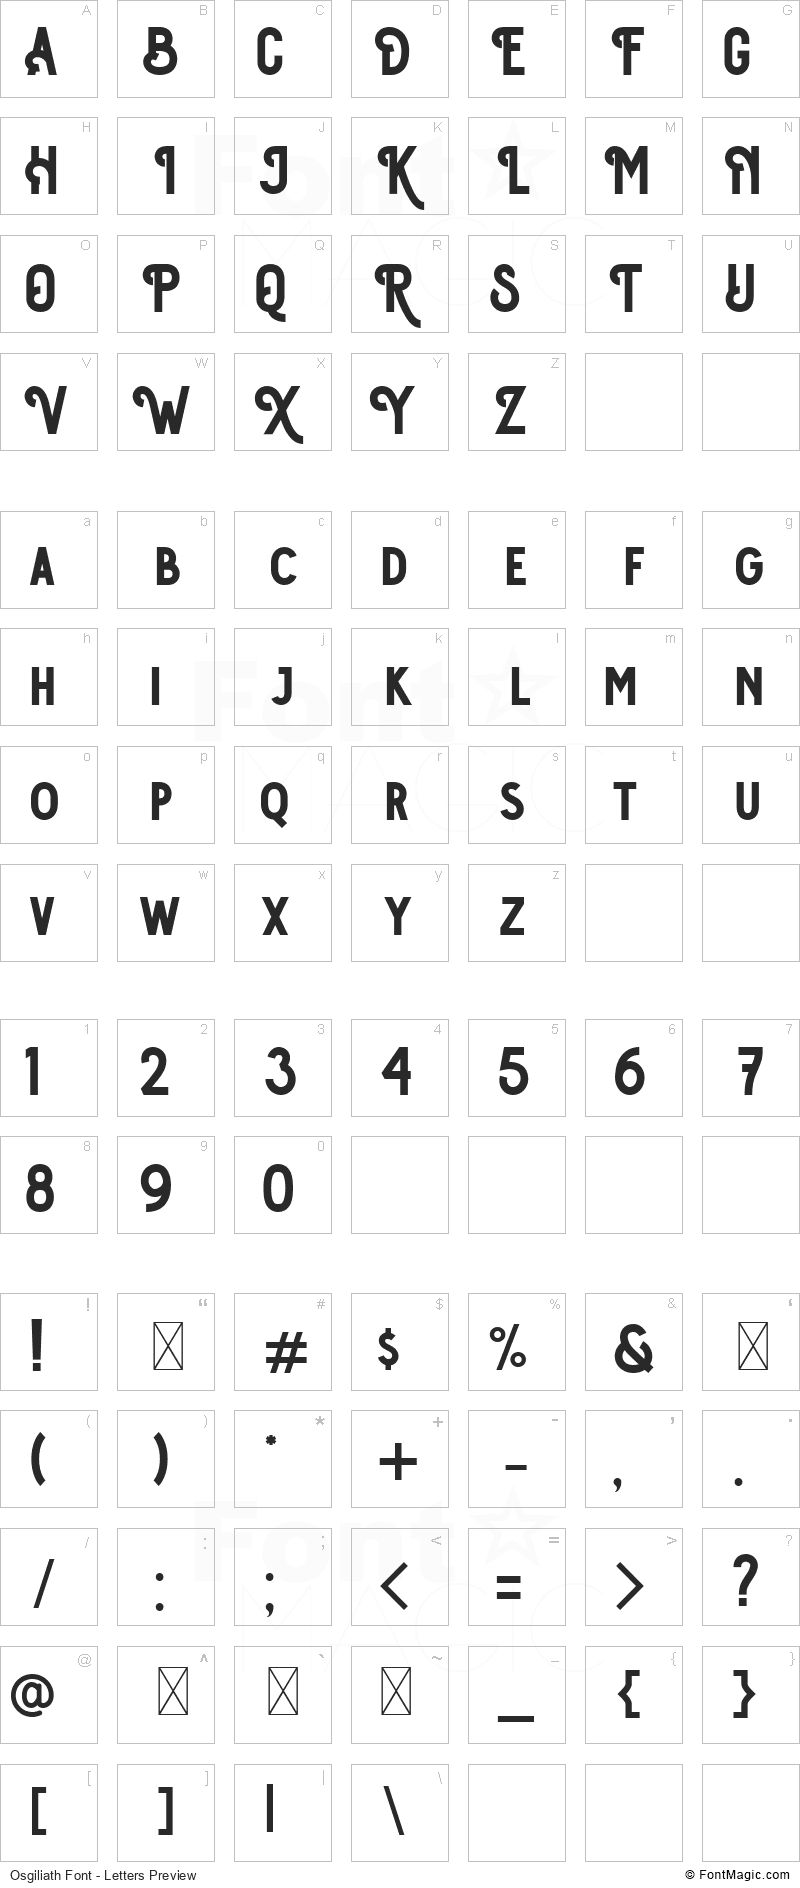 Osgiliath Font - All Latters Preview Chart